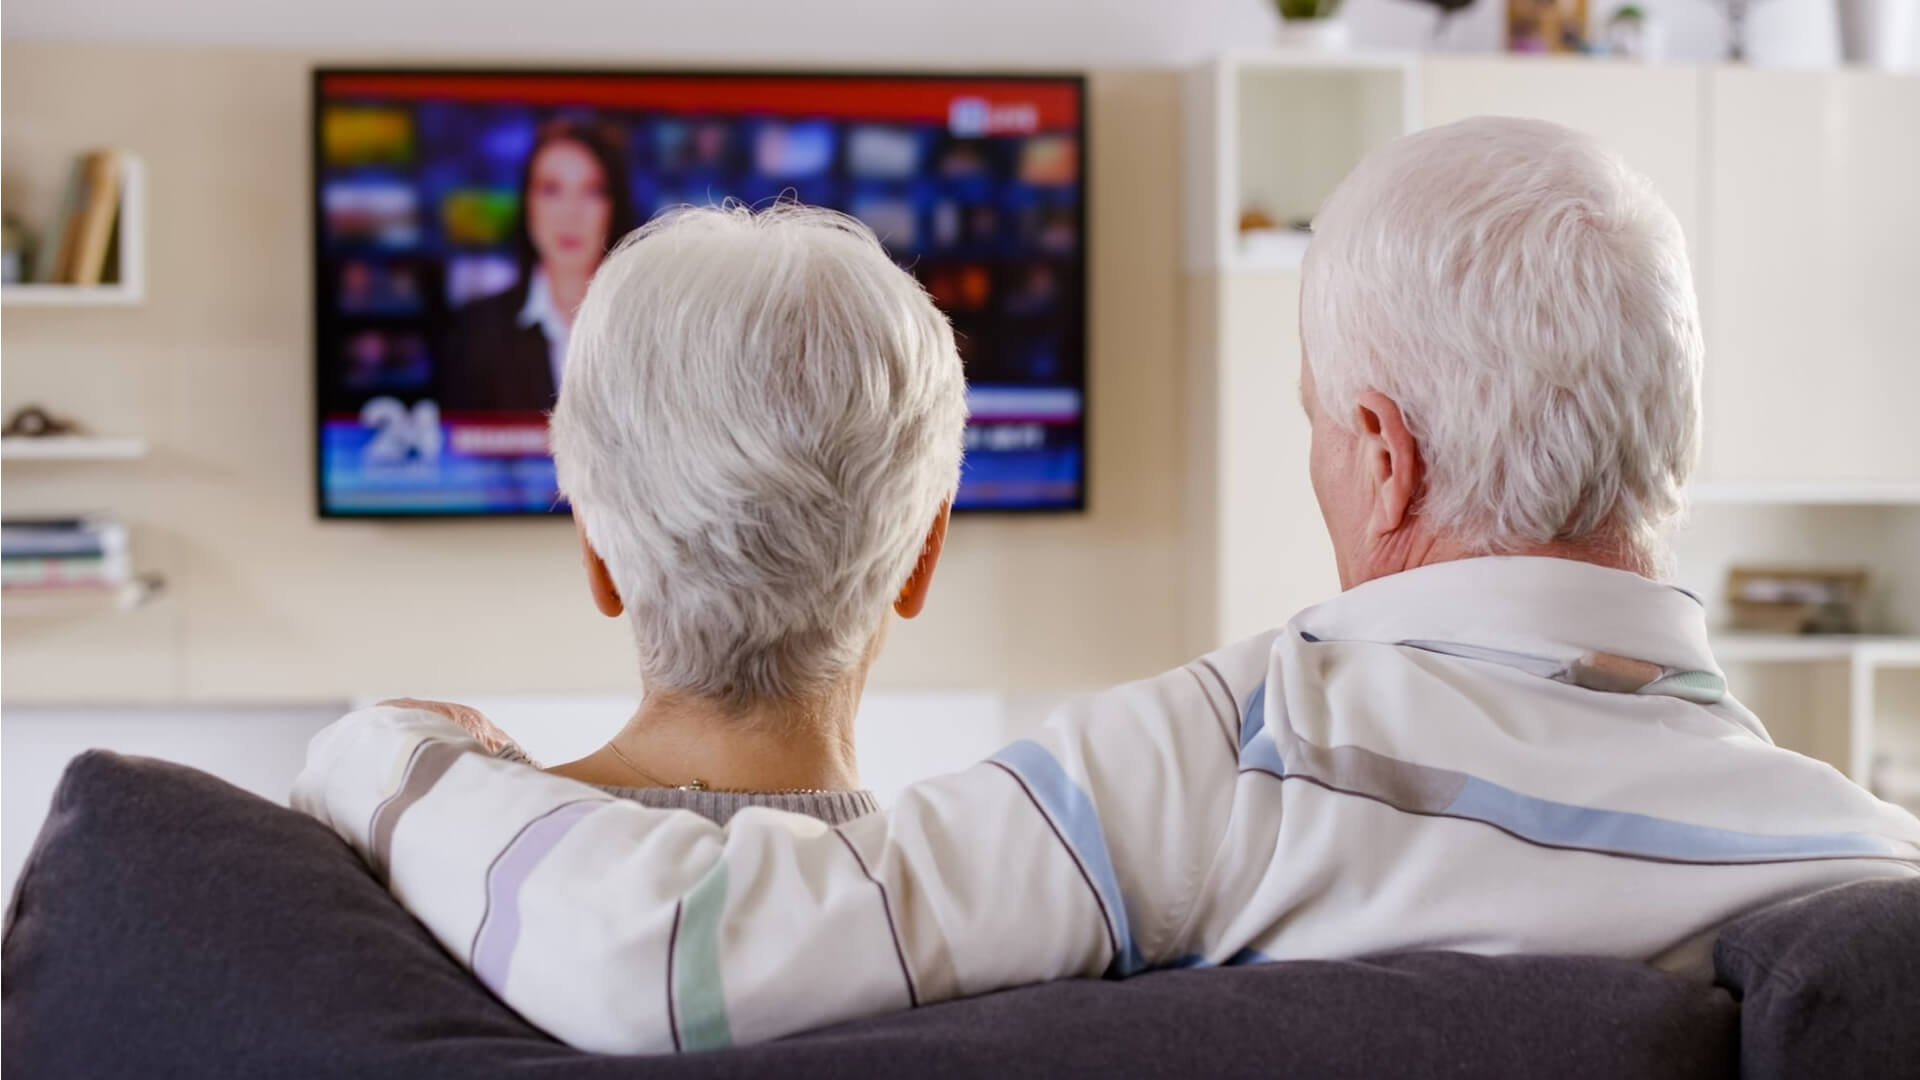 Using digital signage in care homes for entertainment and fun.